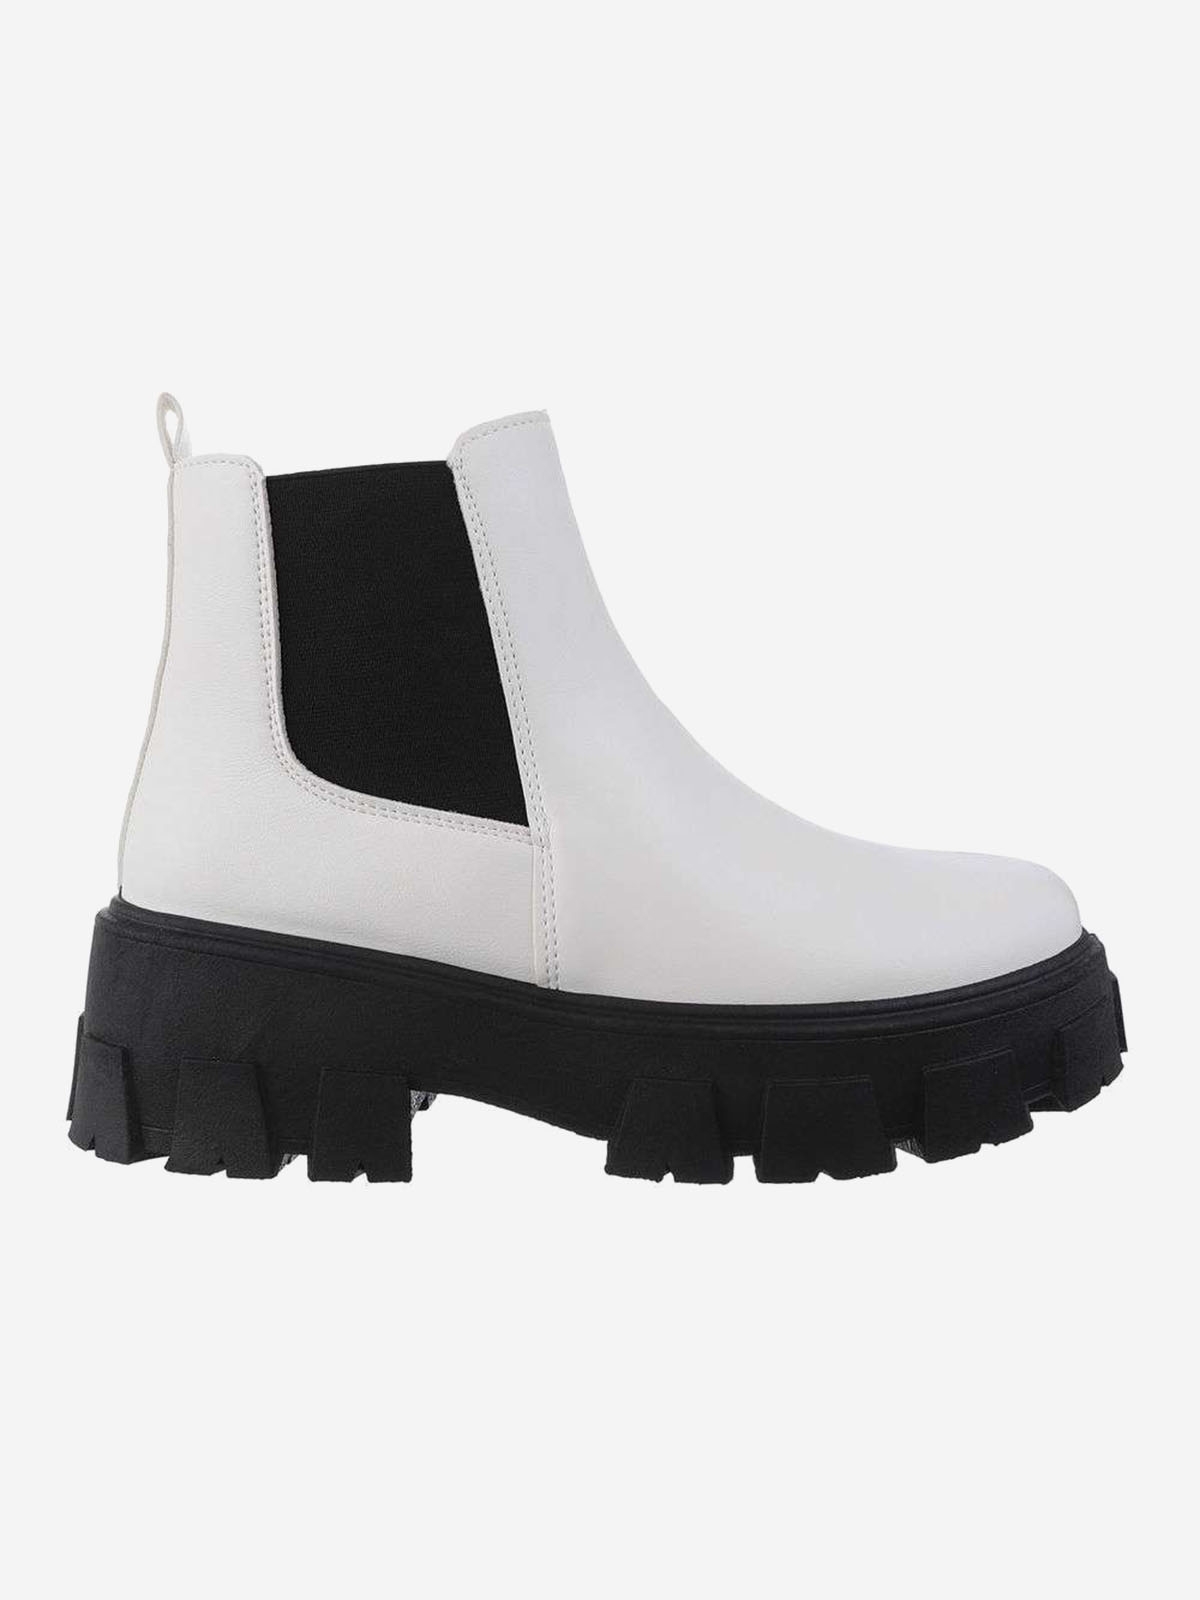 Women's ankle boots with platform in white